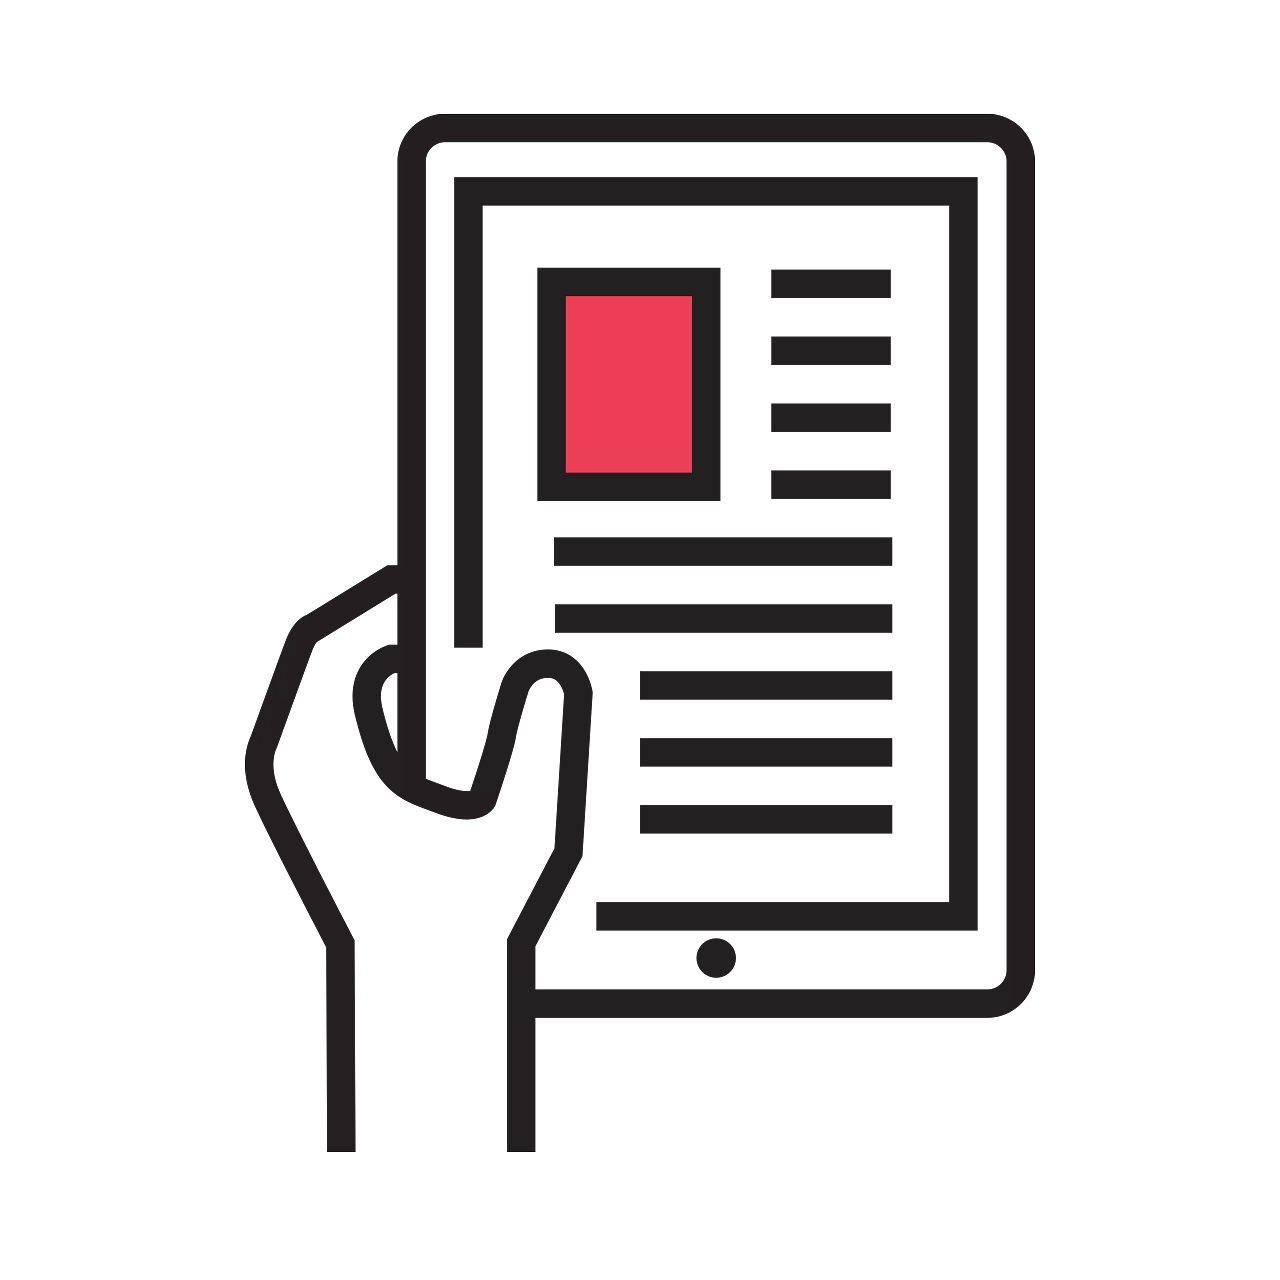 Holding tablet_outline icon_black with red fill (1)